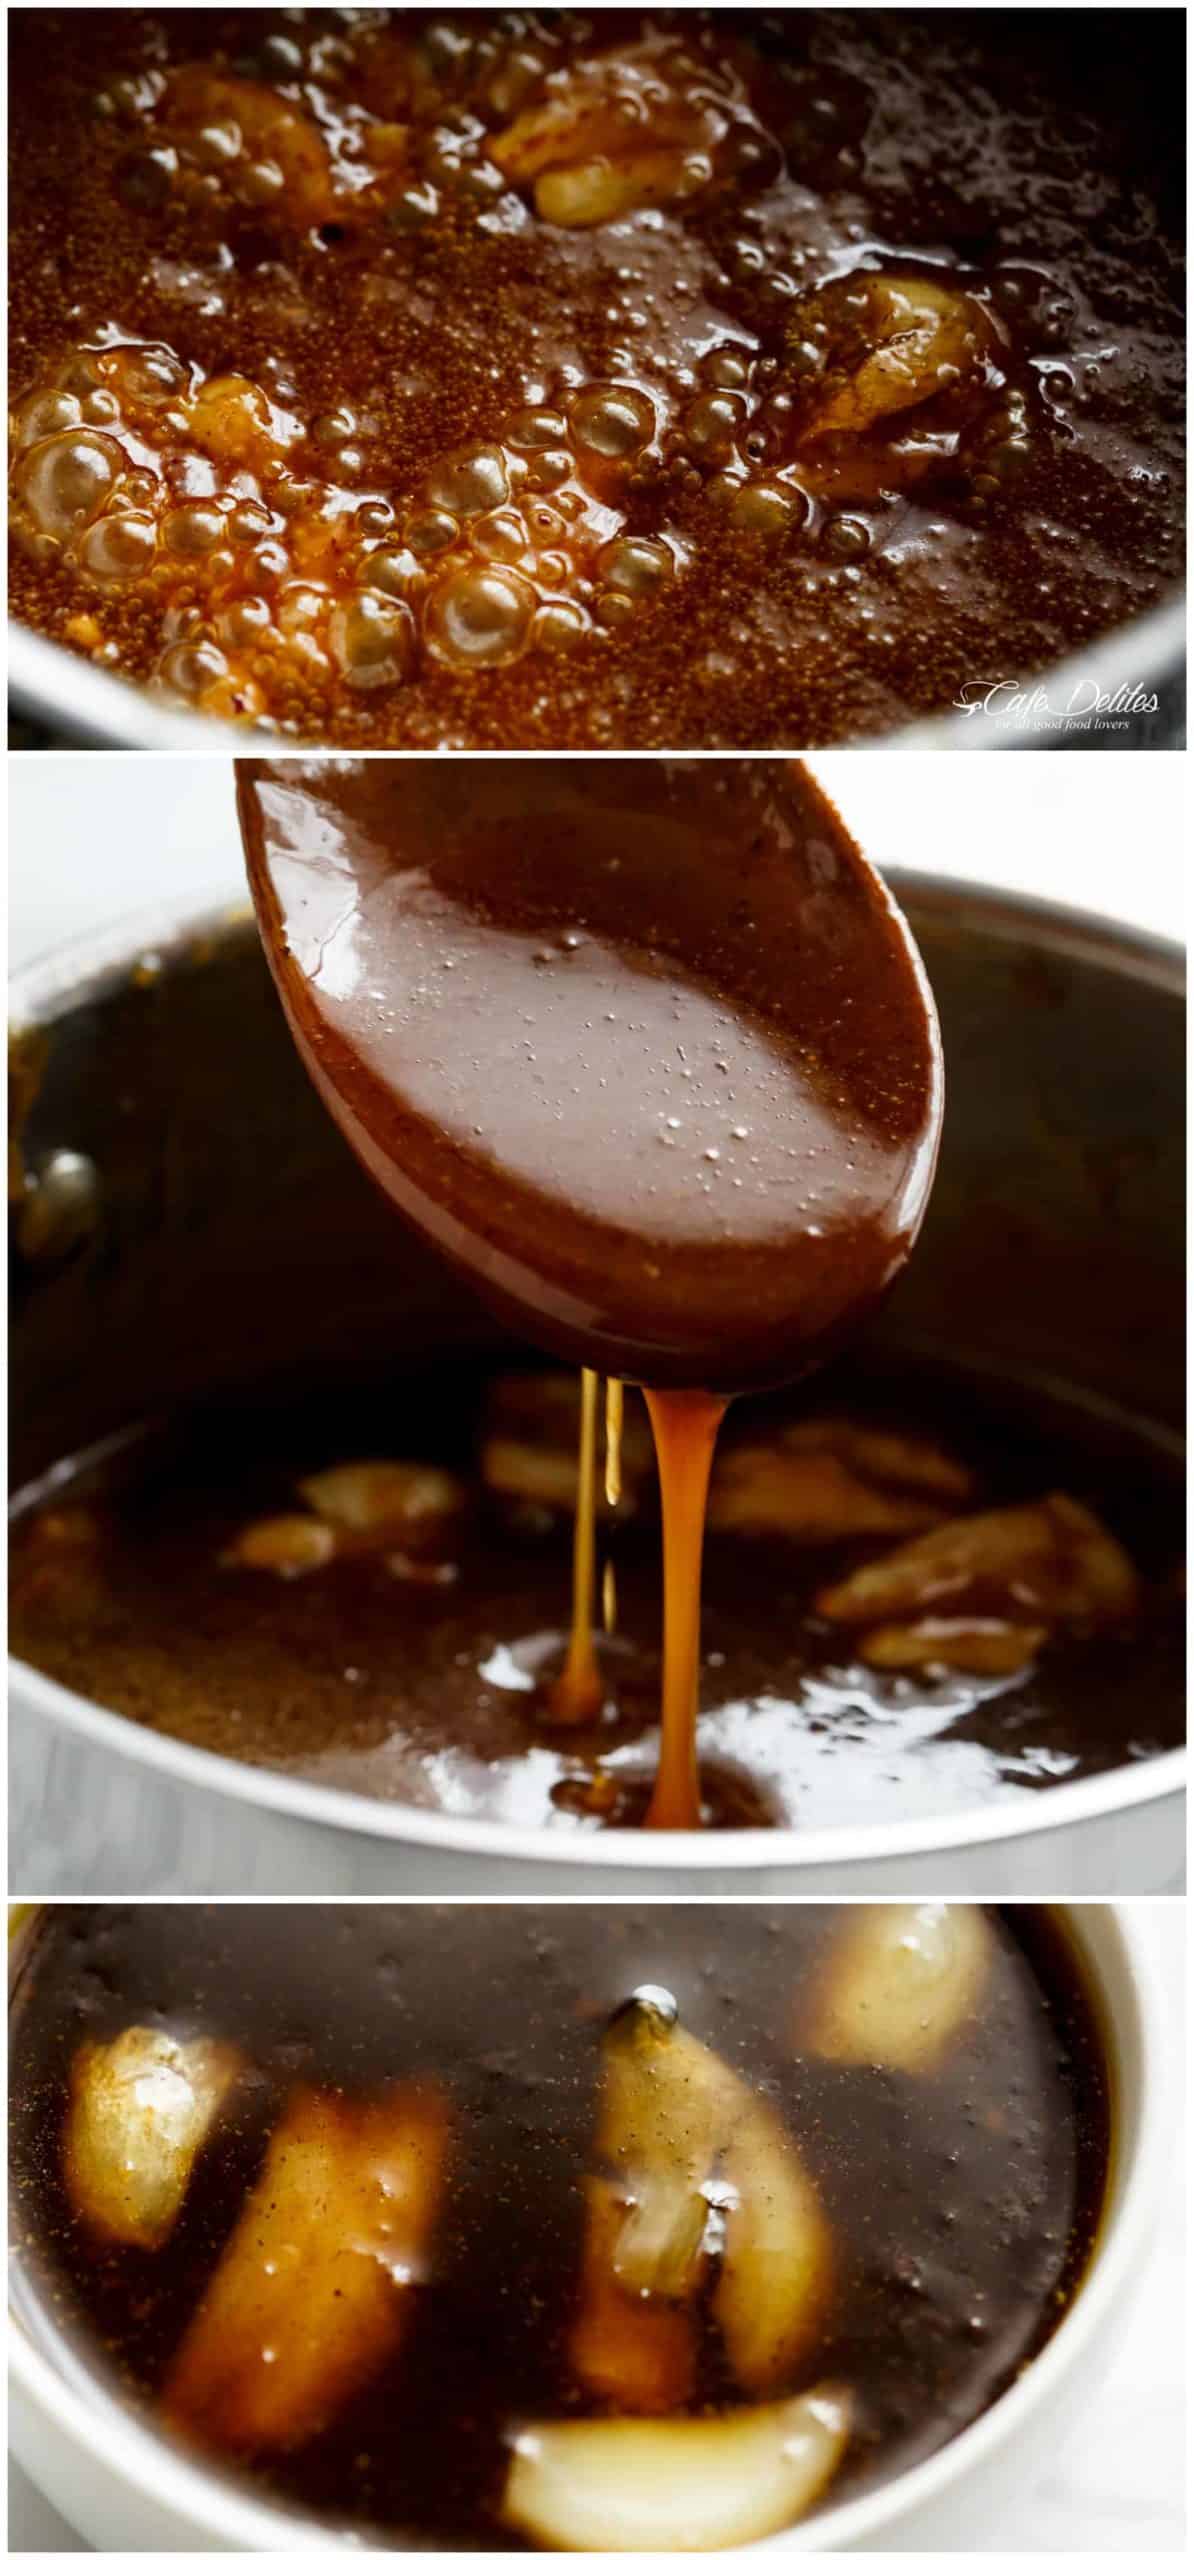 Three images: The first image shows a dark syrup bubbling in a pot, the second shows a thick, dark syrup dripping from a spoon back into the pot. The third shows whole garlic cloves floating in the dark syrup. 